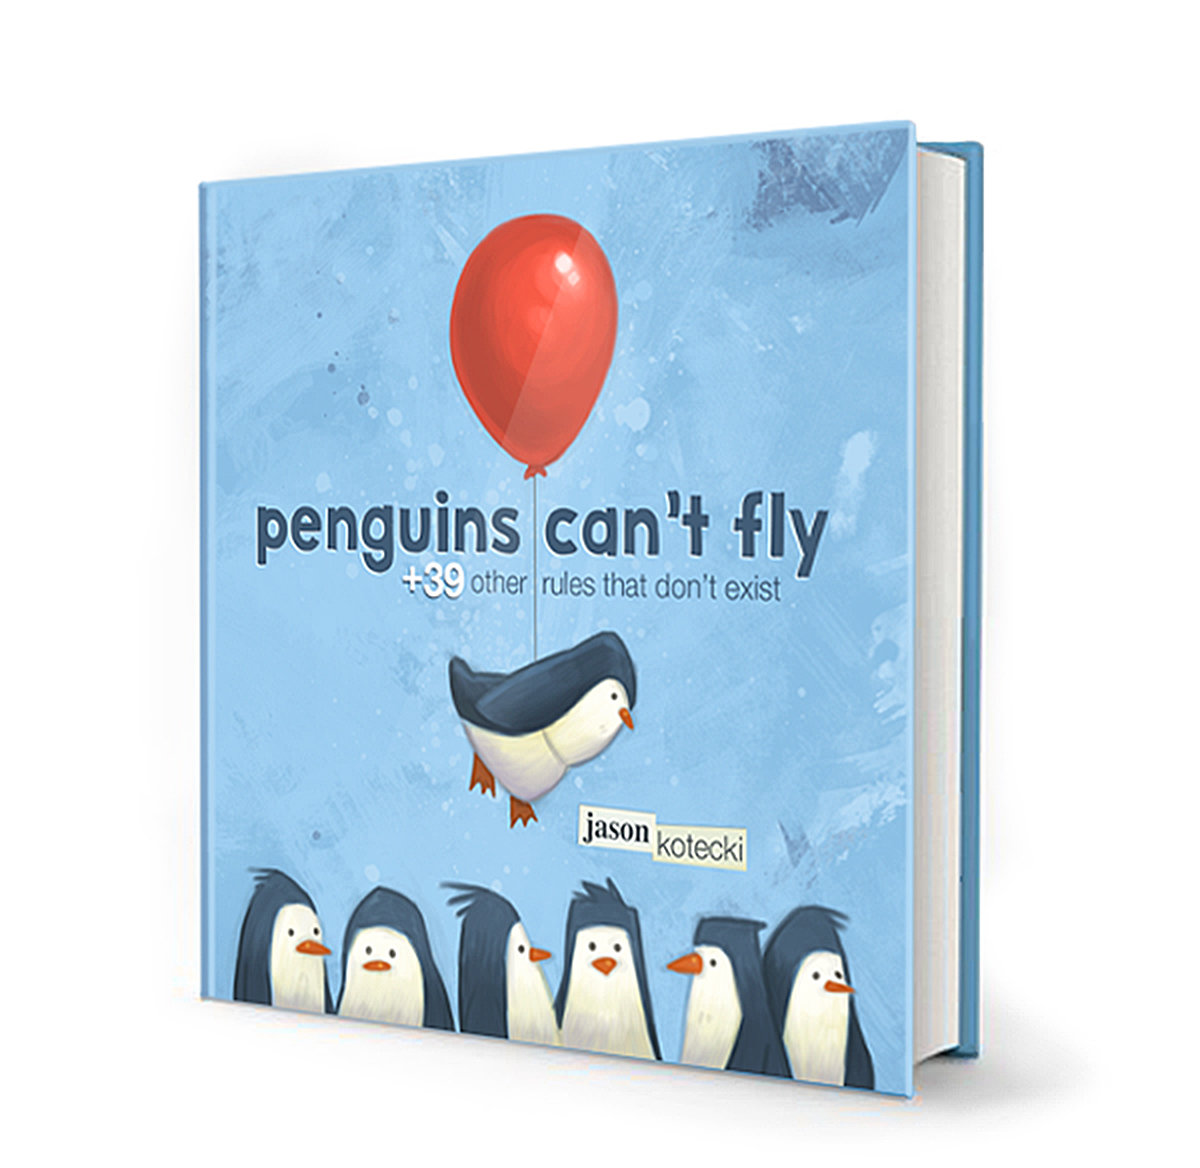 Penguins Can't Fly +39 other rules that don't exist